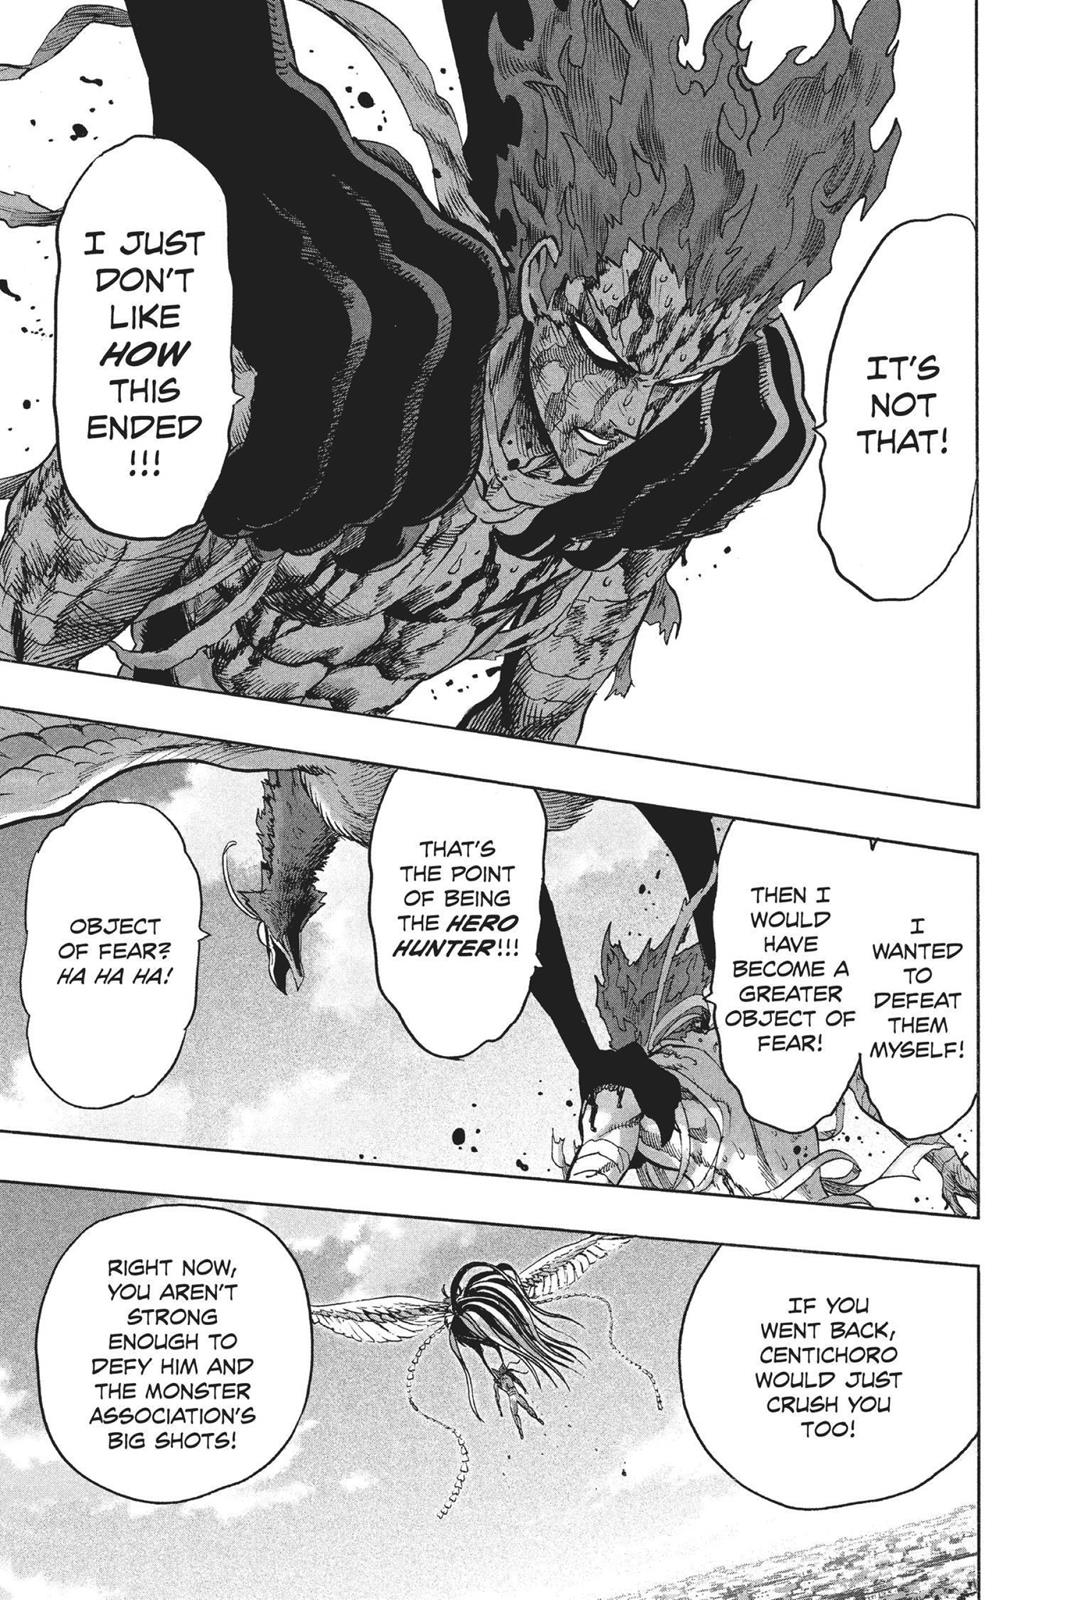 One-Punch Man, Punch 85 image 092